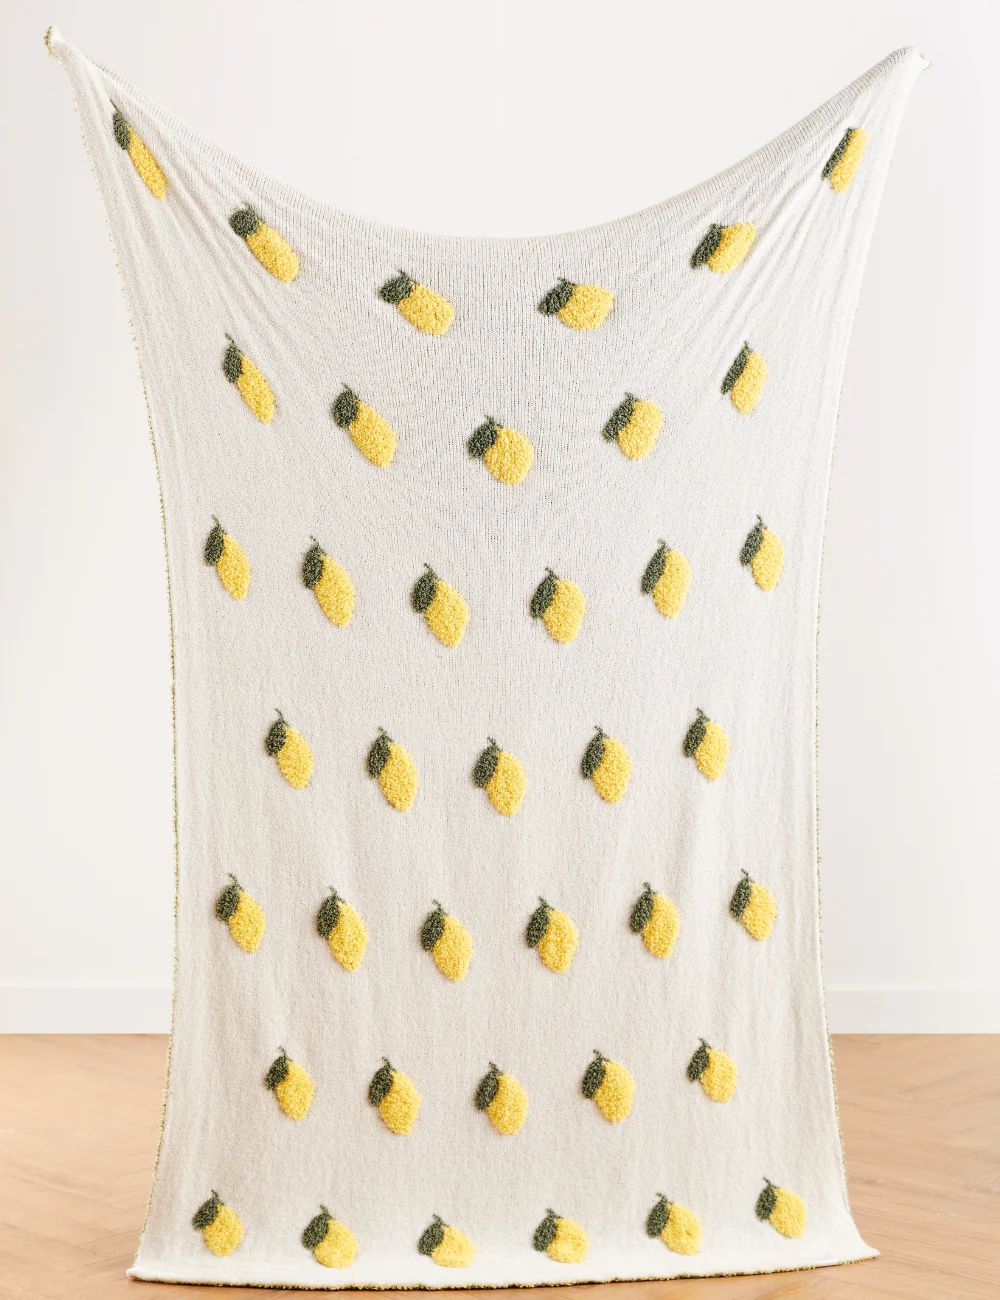 Lemons Buttery Blanket- Full Size | The Styled Collection